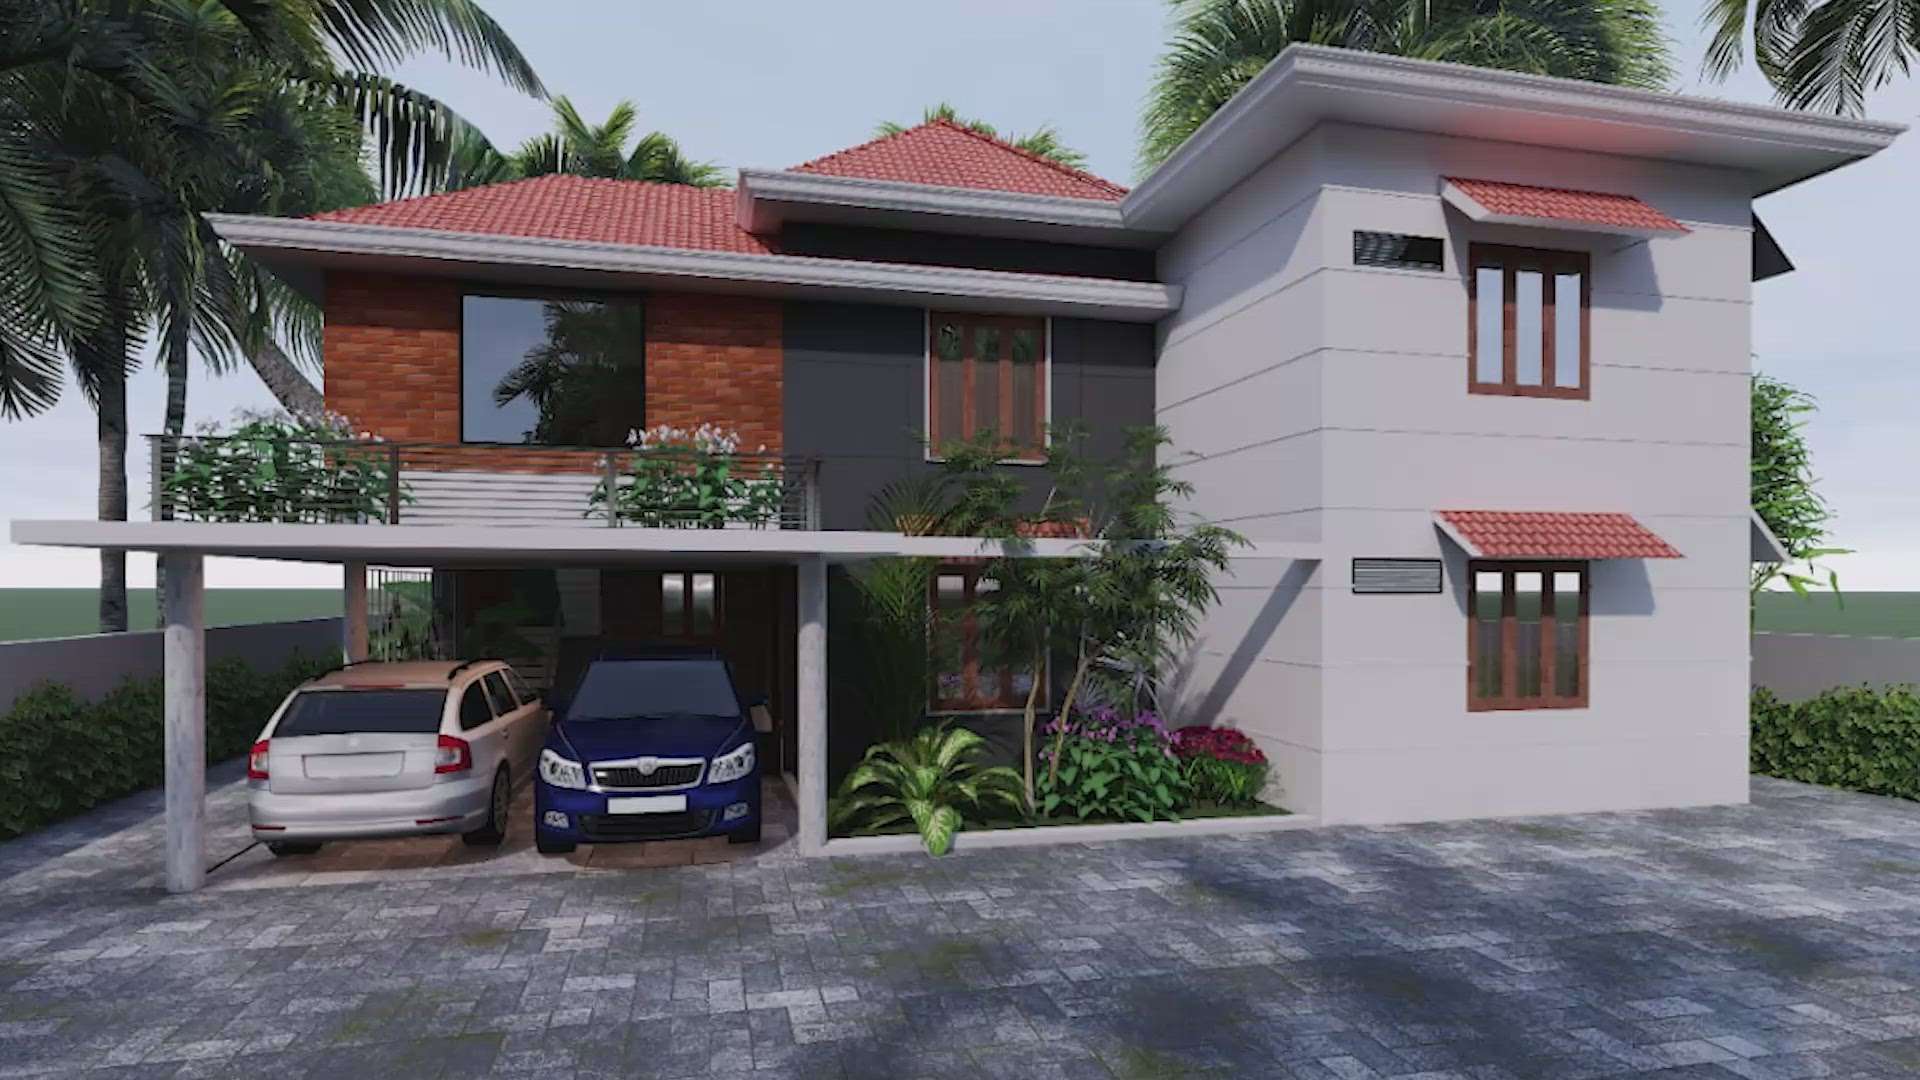 Contact us immediately at 8055234222 for 3d designing and visualization, interior designing and construction requirements. 

 #ivoeryhomes  #ivoeryhomesanddevelopers  #3dvisualisation  #walkthrough  #HouseConstruction  #constructioncompany  #ConstructionCompaniesInKerala